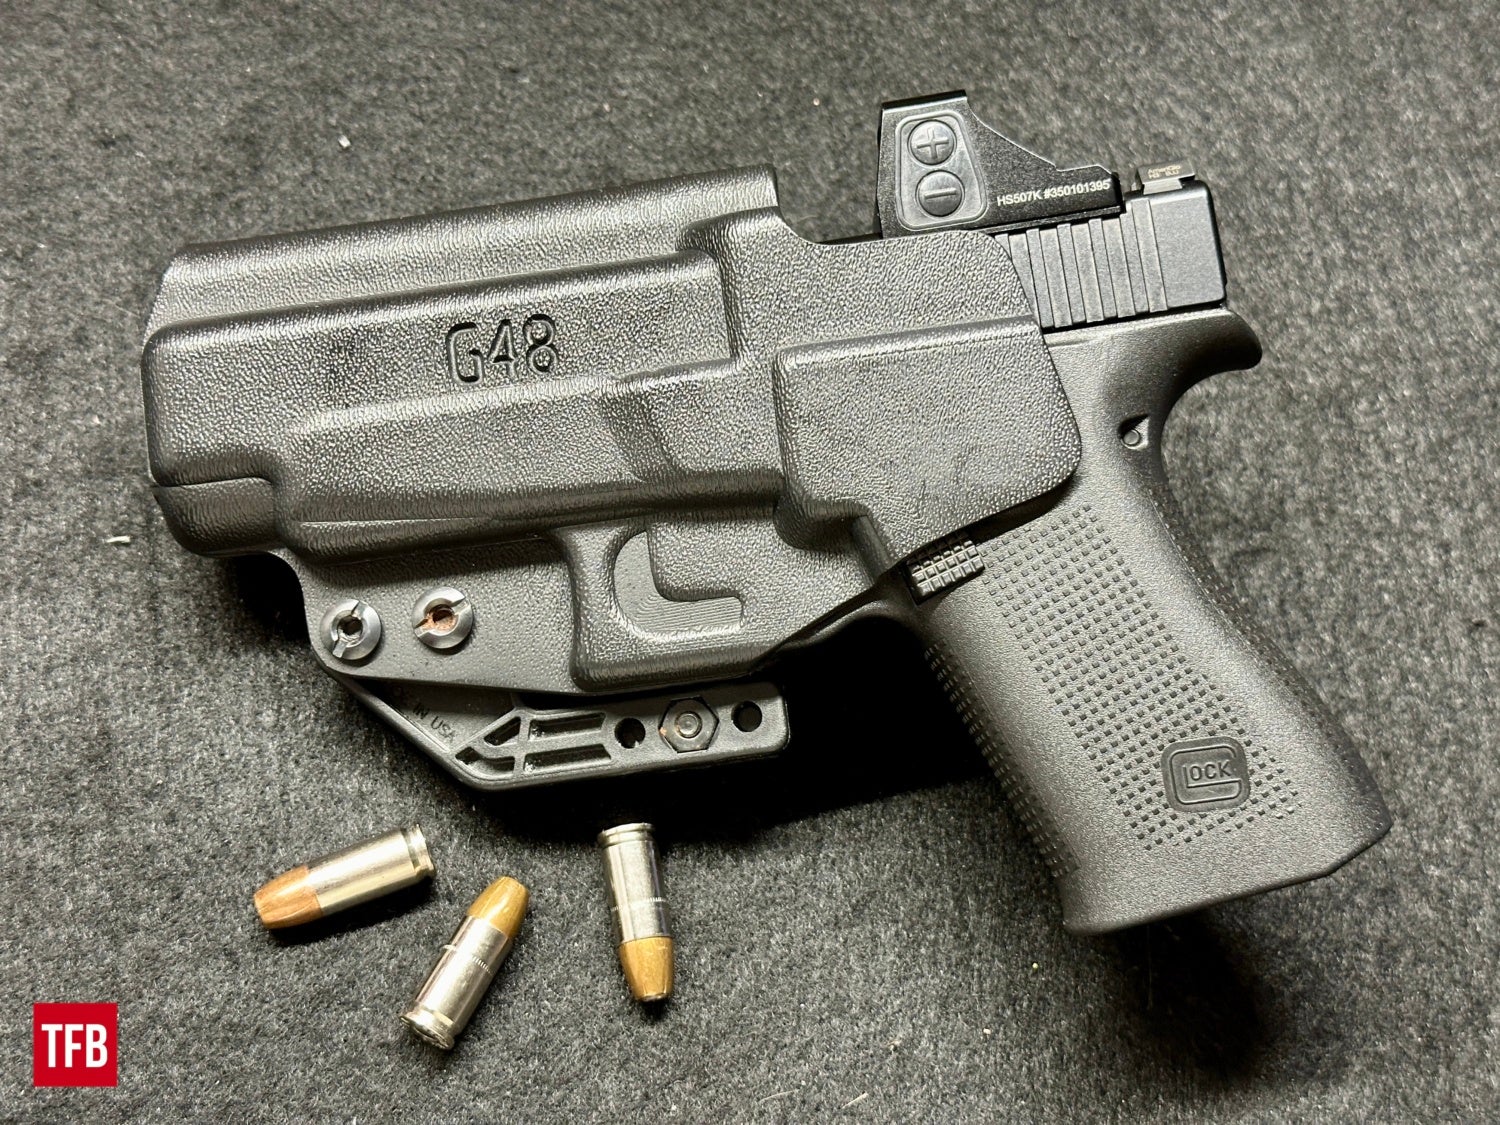 I opted to purchase a PHLster holster to EDC this G48 for several months in testing, and found it to be a thoroughly comfortable IWB concealed carry solution.